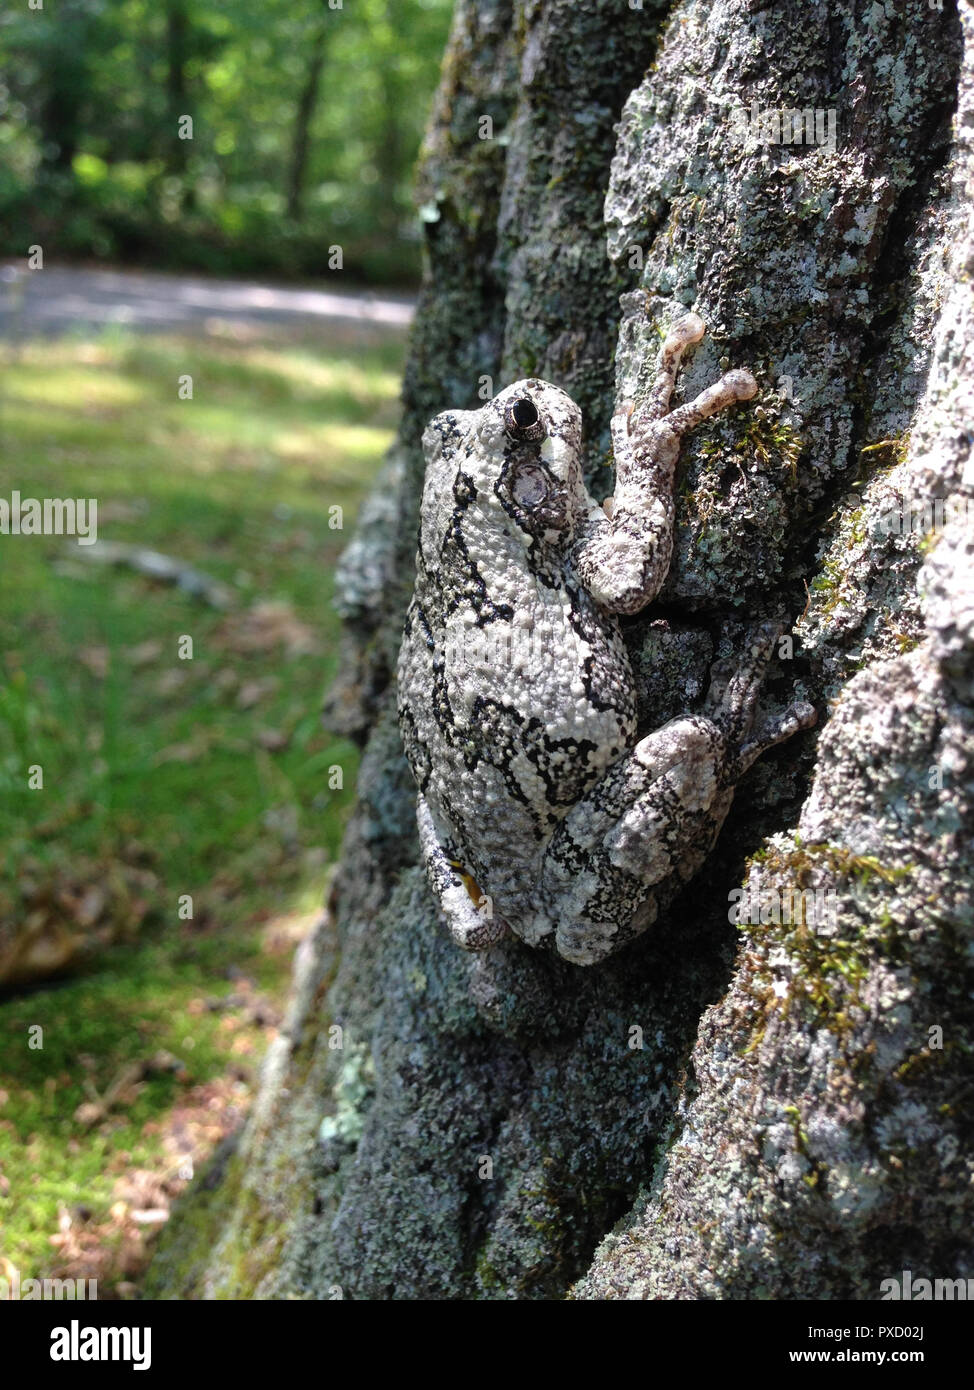 grey gray camouflaged tree frog toad blending in on tree trunk Stock Photo